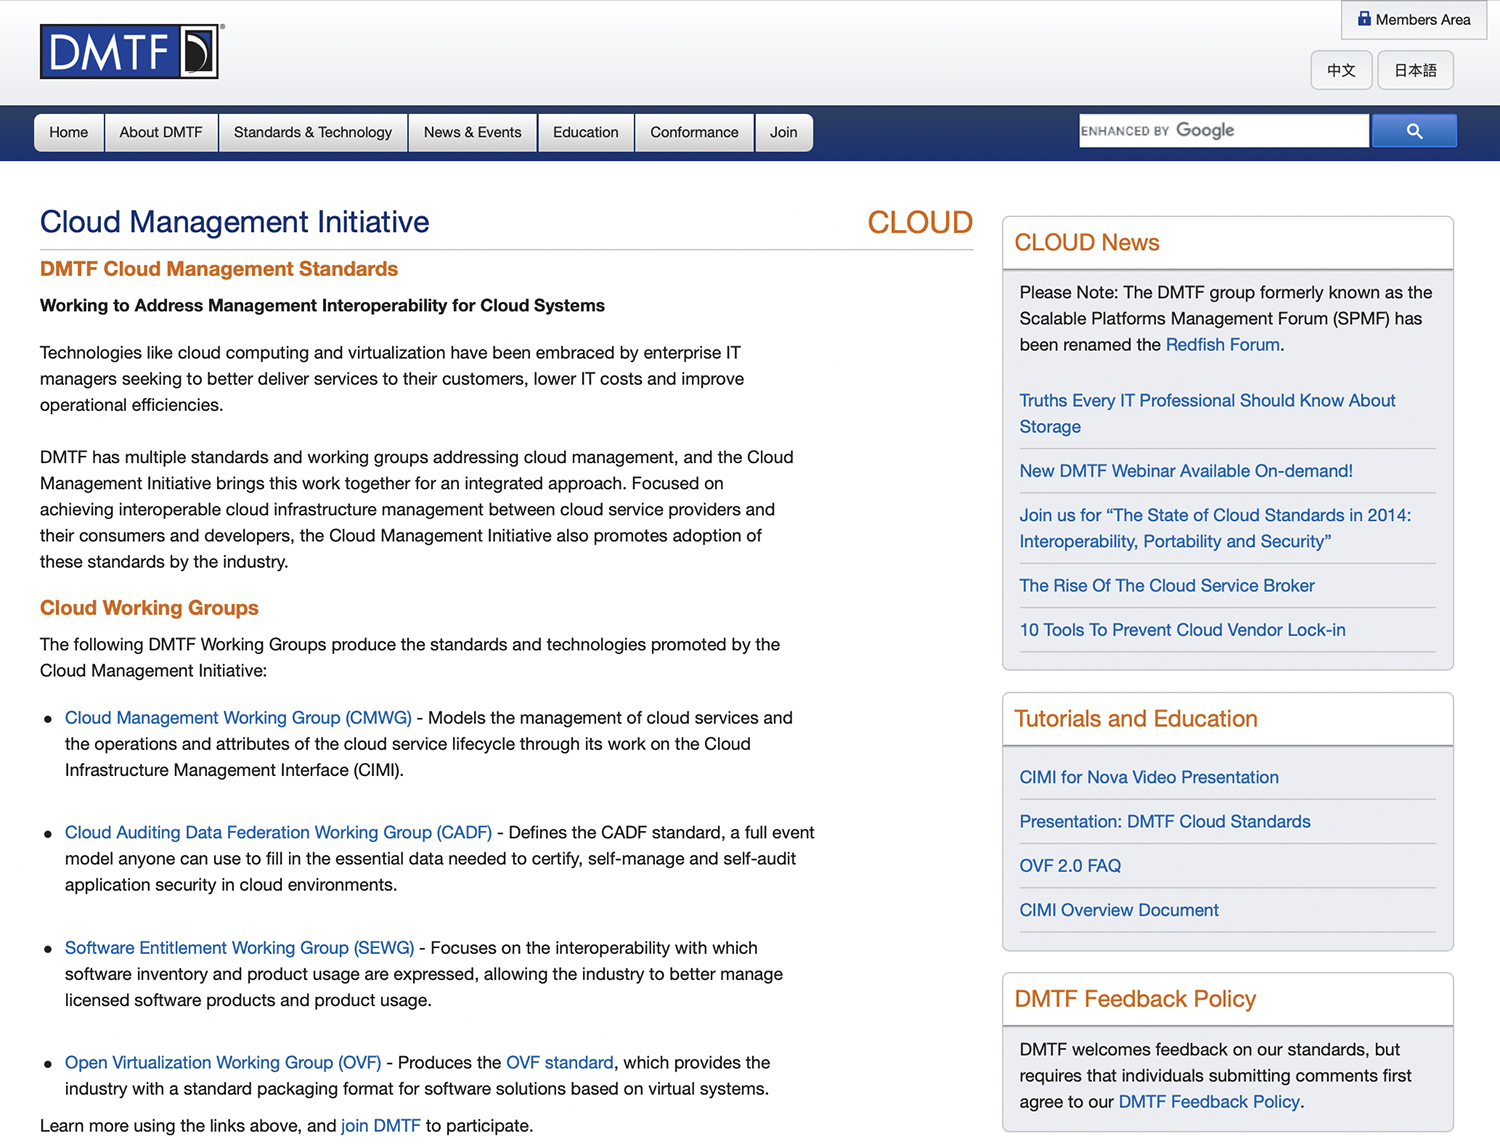 Home, About D M T F, Standards and Technology, News and Events, Education, Conformance, and Join are the options of the top menu. The content in the left pane reads as follows: Cloud Management Initiative. D M T F Cloud Management Standards. Working to Address Management Interoperability for Cloud Systems. Technologies like cloud computing and virtualization have been embraced by enterprise I T managers seeking to better deliver services to their customers, lower I T costs and improve operational efficiencies. D M T F has multiple standards and working groups addressing cloud management, and the Cloud Management Initiative brings this work together for an integrated approach. Focused on achieving interoperable cloud infrastructure management between cloud service providers and their consumers and developers, the Cloud Management Initiative also promotes adoption of these standards by the industry. The following text is shown under the head Cloud Working Groups: The following D M T F Working Groups produce the standards and technologies promoted by the Cloud Management Initiative: Cloud Management Working Group (C M W G): Models the management of cloud services and the operations and attributes of the cloud service lifecycle through its work on the Cloud Infrastructure Management Interface (C I M I). Cloud Auditing Data Federation Working Group (C A D F): Defines the C A D F standard, a full event model anyone can use to fill in the essential data needed to certify, self-manage and self-audit application security in cloud environments. Software Entitlement Working Group (S E W G): Focuses on the interoperability with which software inventory and product usage are expressed, allowing the industry to better manage licensed software products and product usage. Open Virtualization Working Group (O V F): Produces the O V F standard, which provides the industry with a standard packaging format for software solutions based on virtual systems. Learn more using the links above, and join D M T F to participate. The content of the right pane is titled Cloud. A box representing Cloud News reads as follows: Please Note: The D M T F group formerly known as the Scalable Platforms Management Forum (S P M F) has been renamed the Redfish Forum. Truths Every I T Professional Should Know About Storage. New D M T F Webinar Available On-demand! Join us for “The State of Cloud Standards in 2014: Interoperability, Portability and Security.” The Rise Of The Cloud Service Broker. 10 Tools to Prevent Cloud Vendor Lock in. Another box representing Tutorials and Education reads as follows: C I M I for Nova Video Presentation. Presentation: D M T F Cloud Standards. O V F 2.0 F A Q. C I M I Overview Document. Another box representing D M T F Feedback Policy reads as follows: D M T F welcomes feedback on our standards, but requires that individuals submitting comments first agree to our D M T F Feedback Policy.
